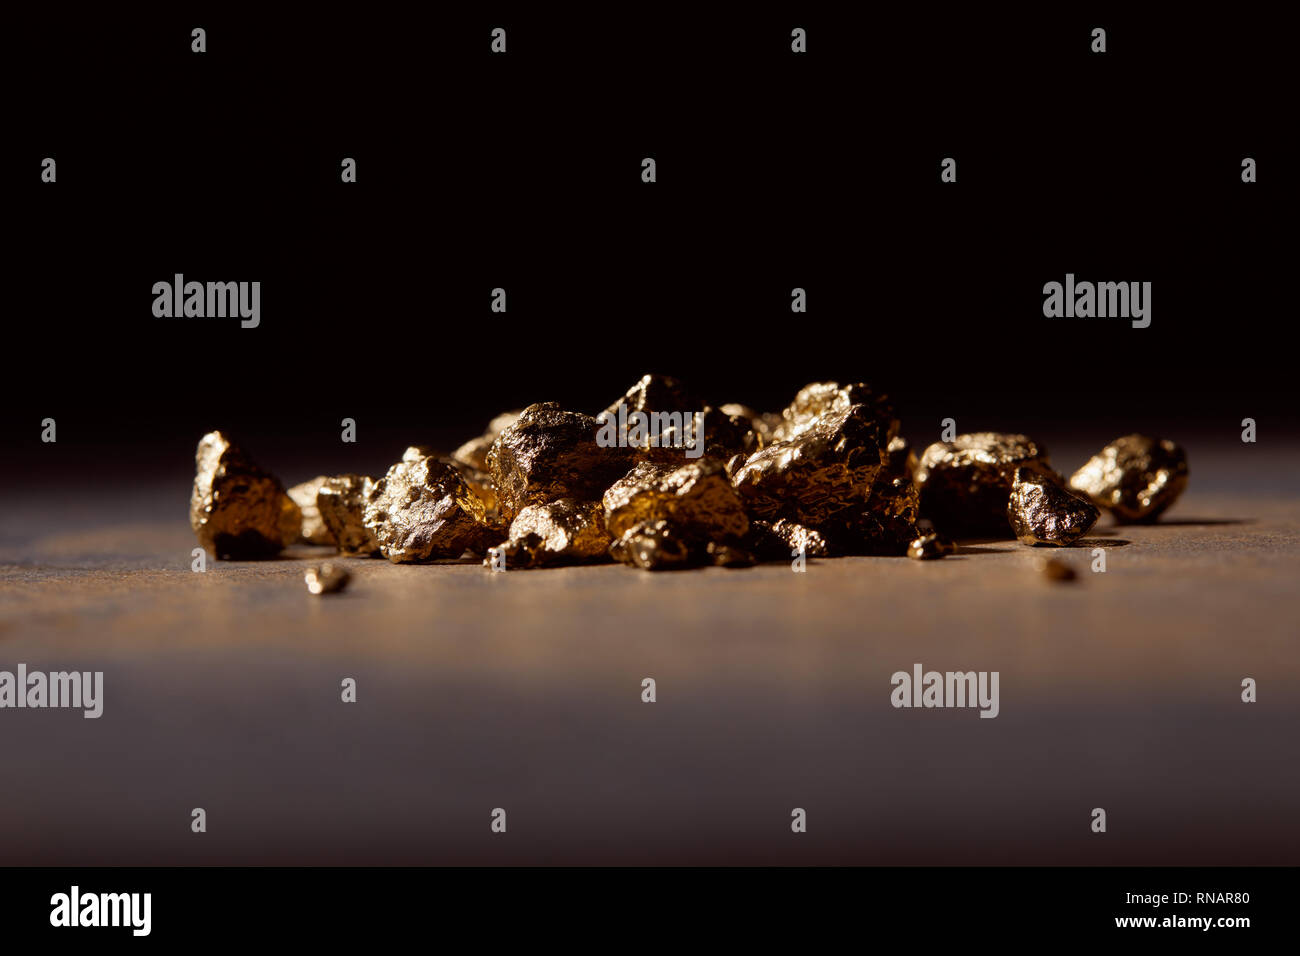 unwrought golden stones at dark on marble table and black background Stock Photo